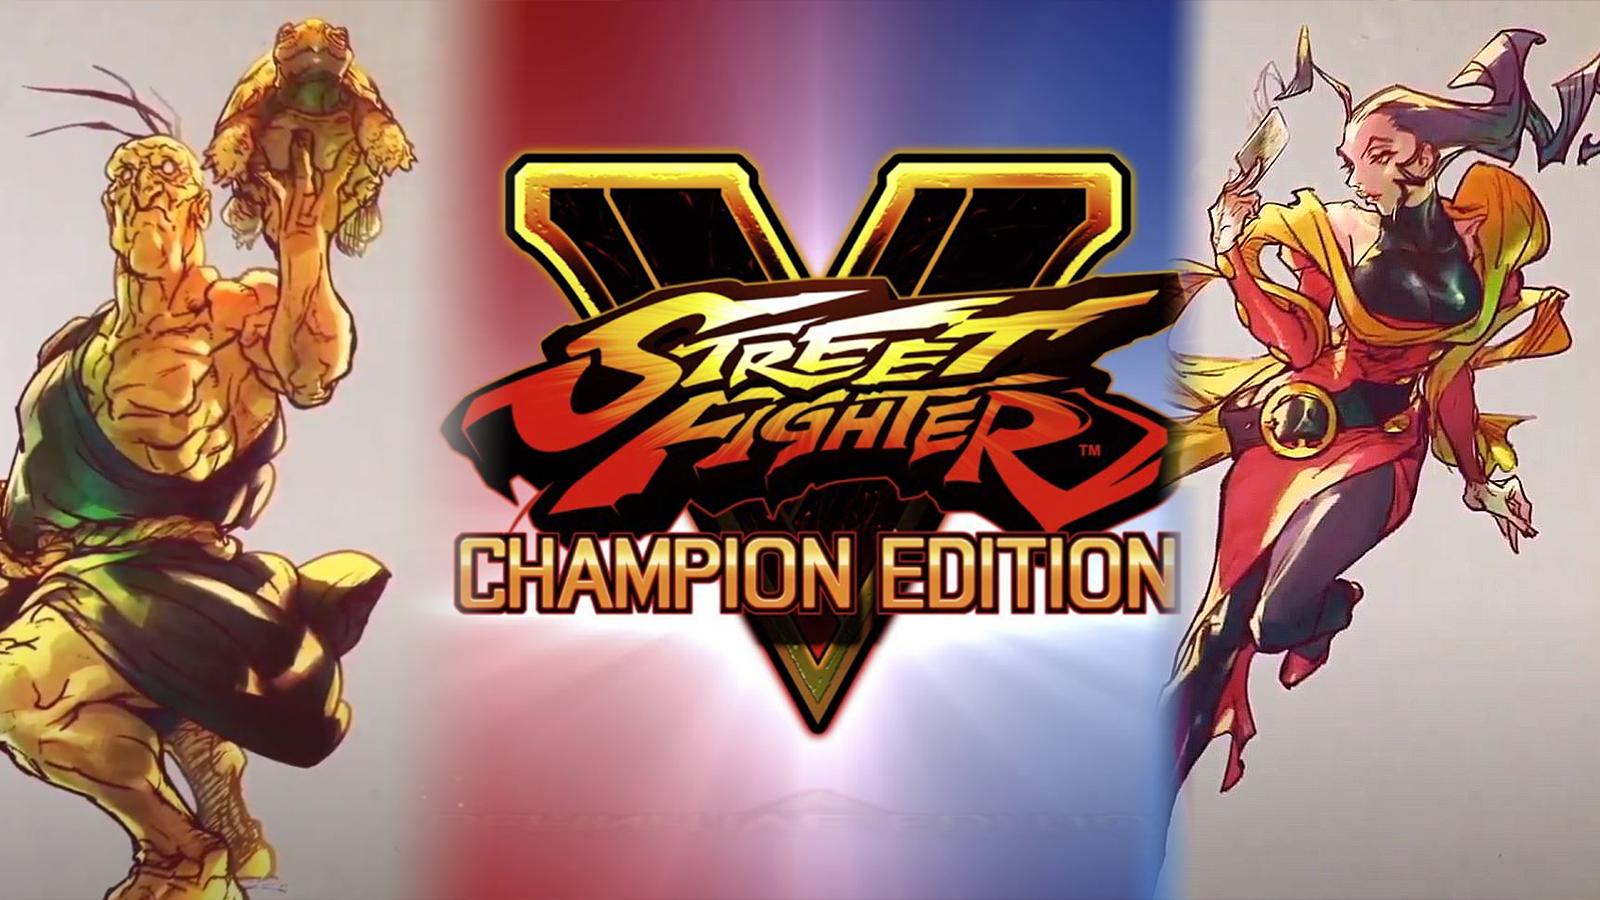 Behold Street Fighter IV's New Look